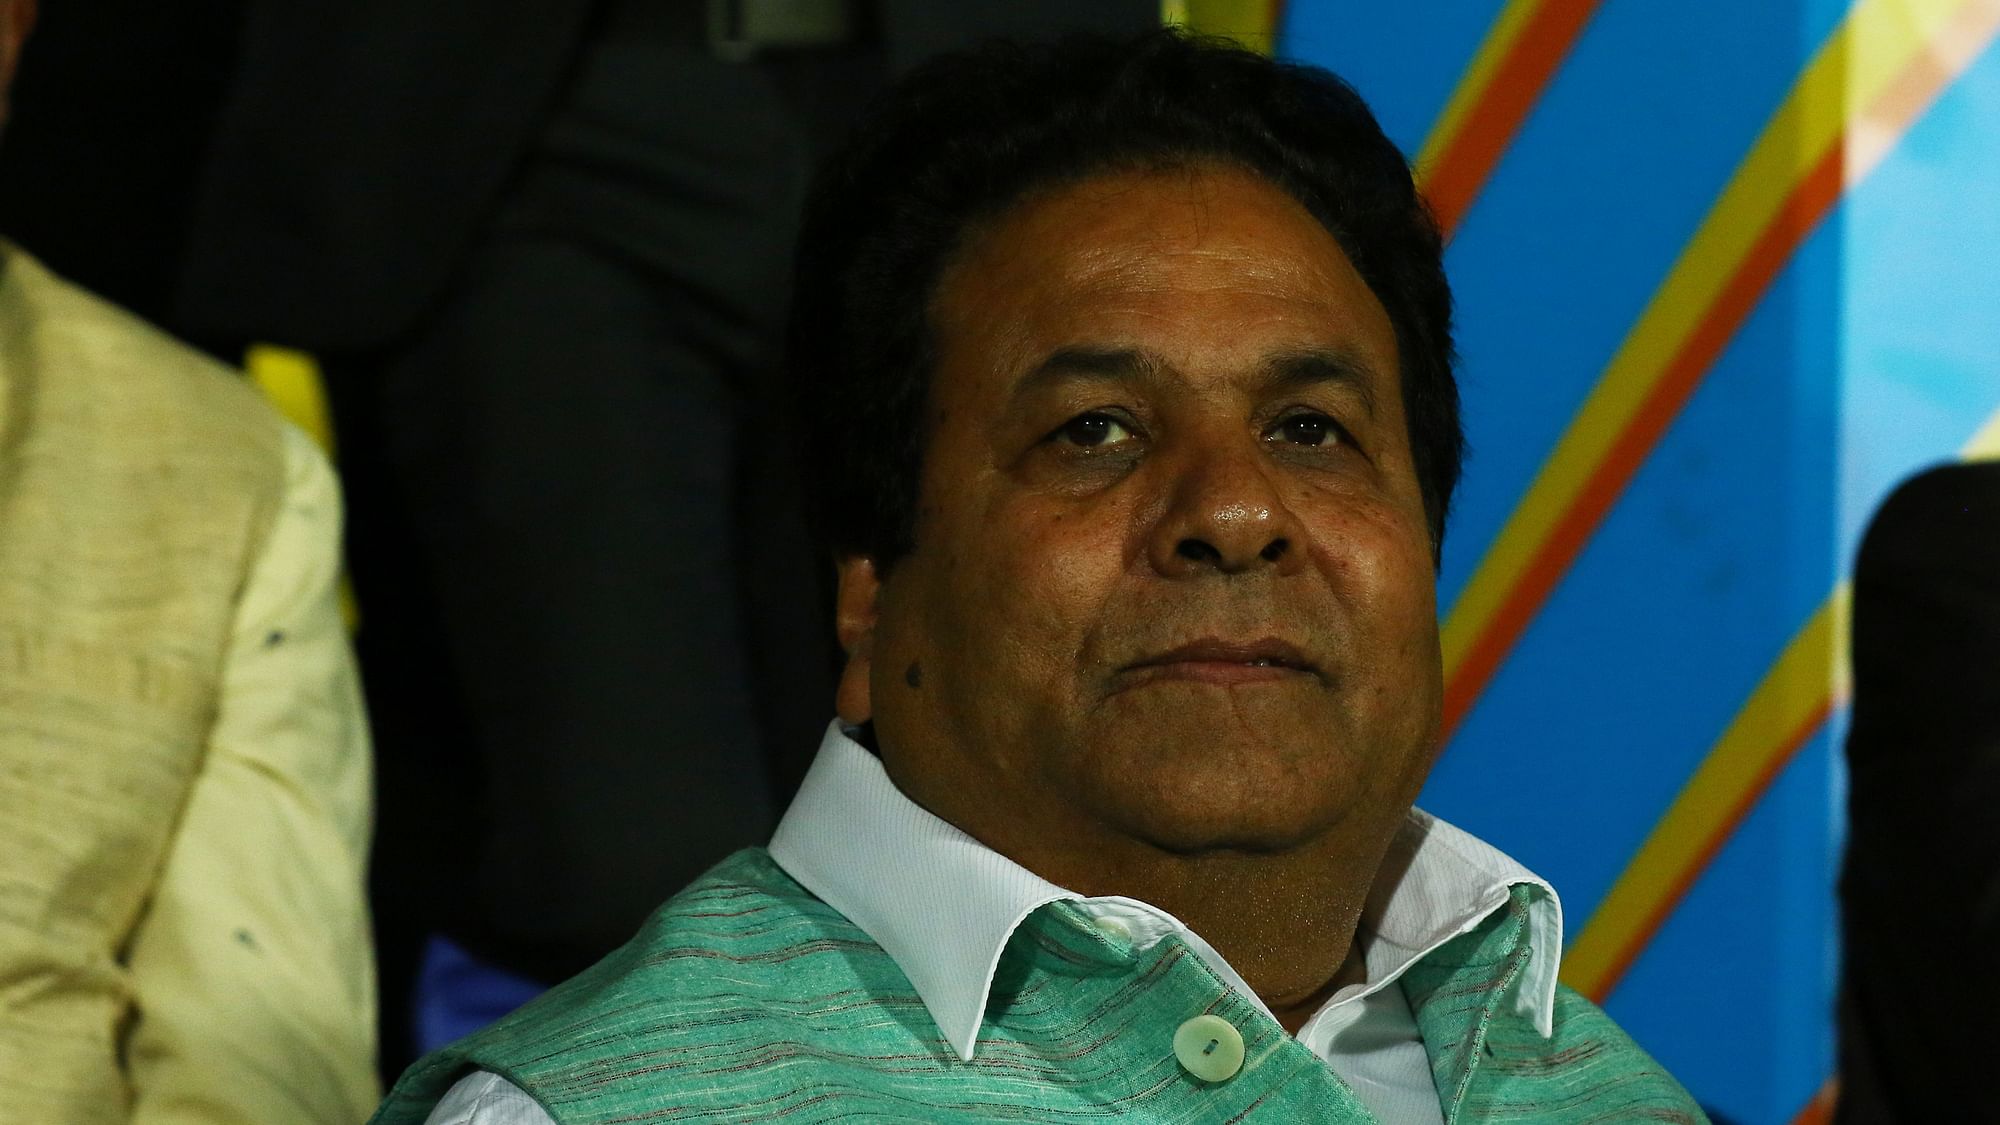 Indian Premier League Chairman Rajeev Shukla has claimed that IPL captains had decided against ‘Mankading’.